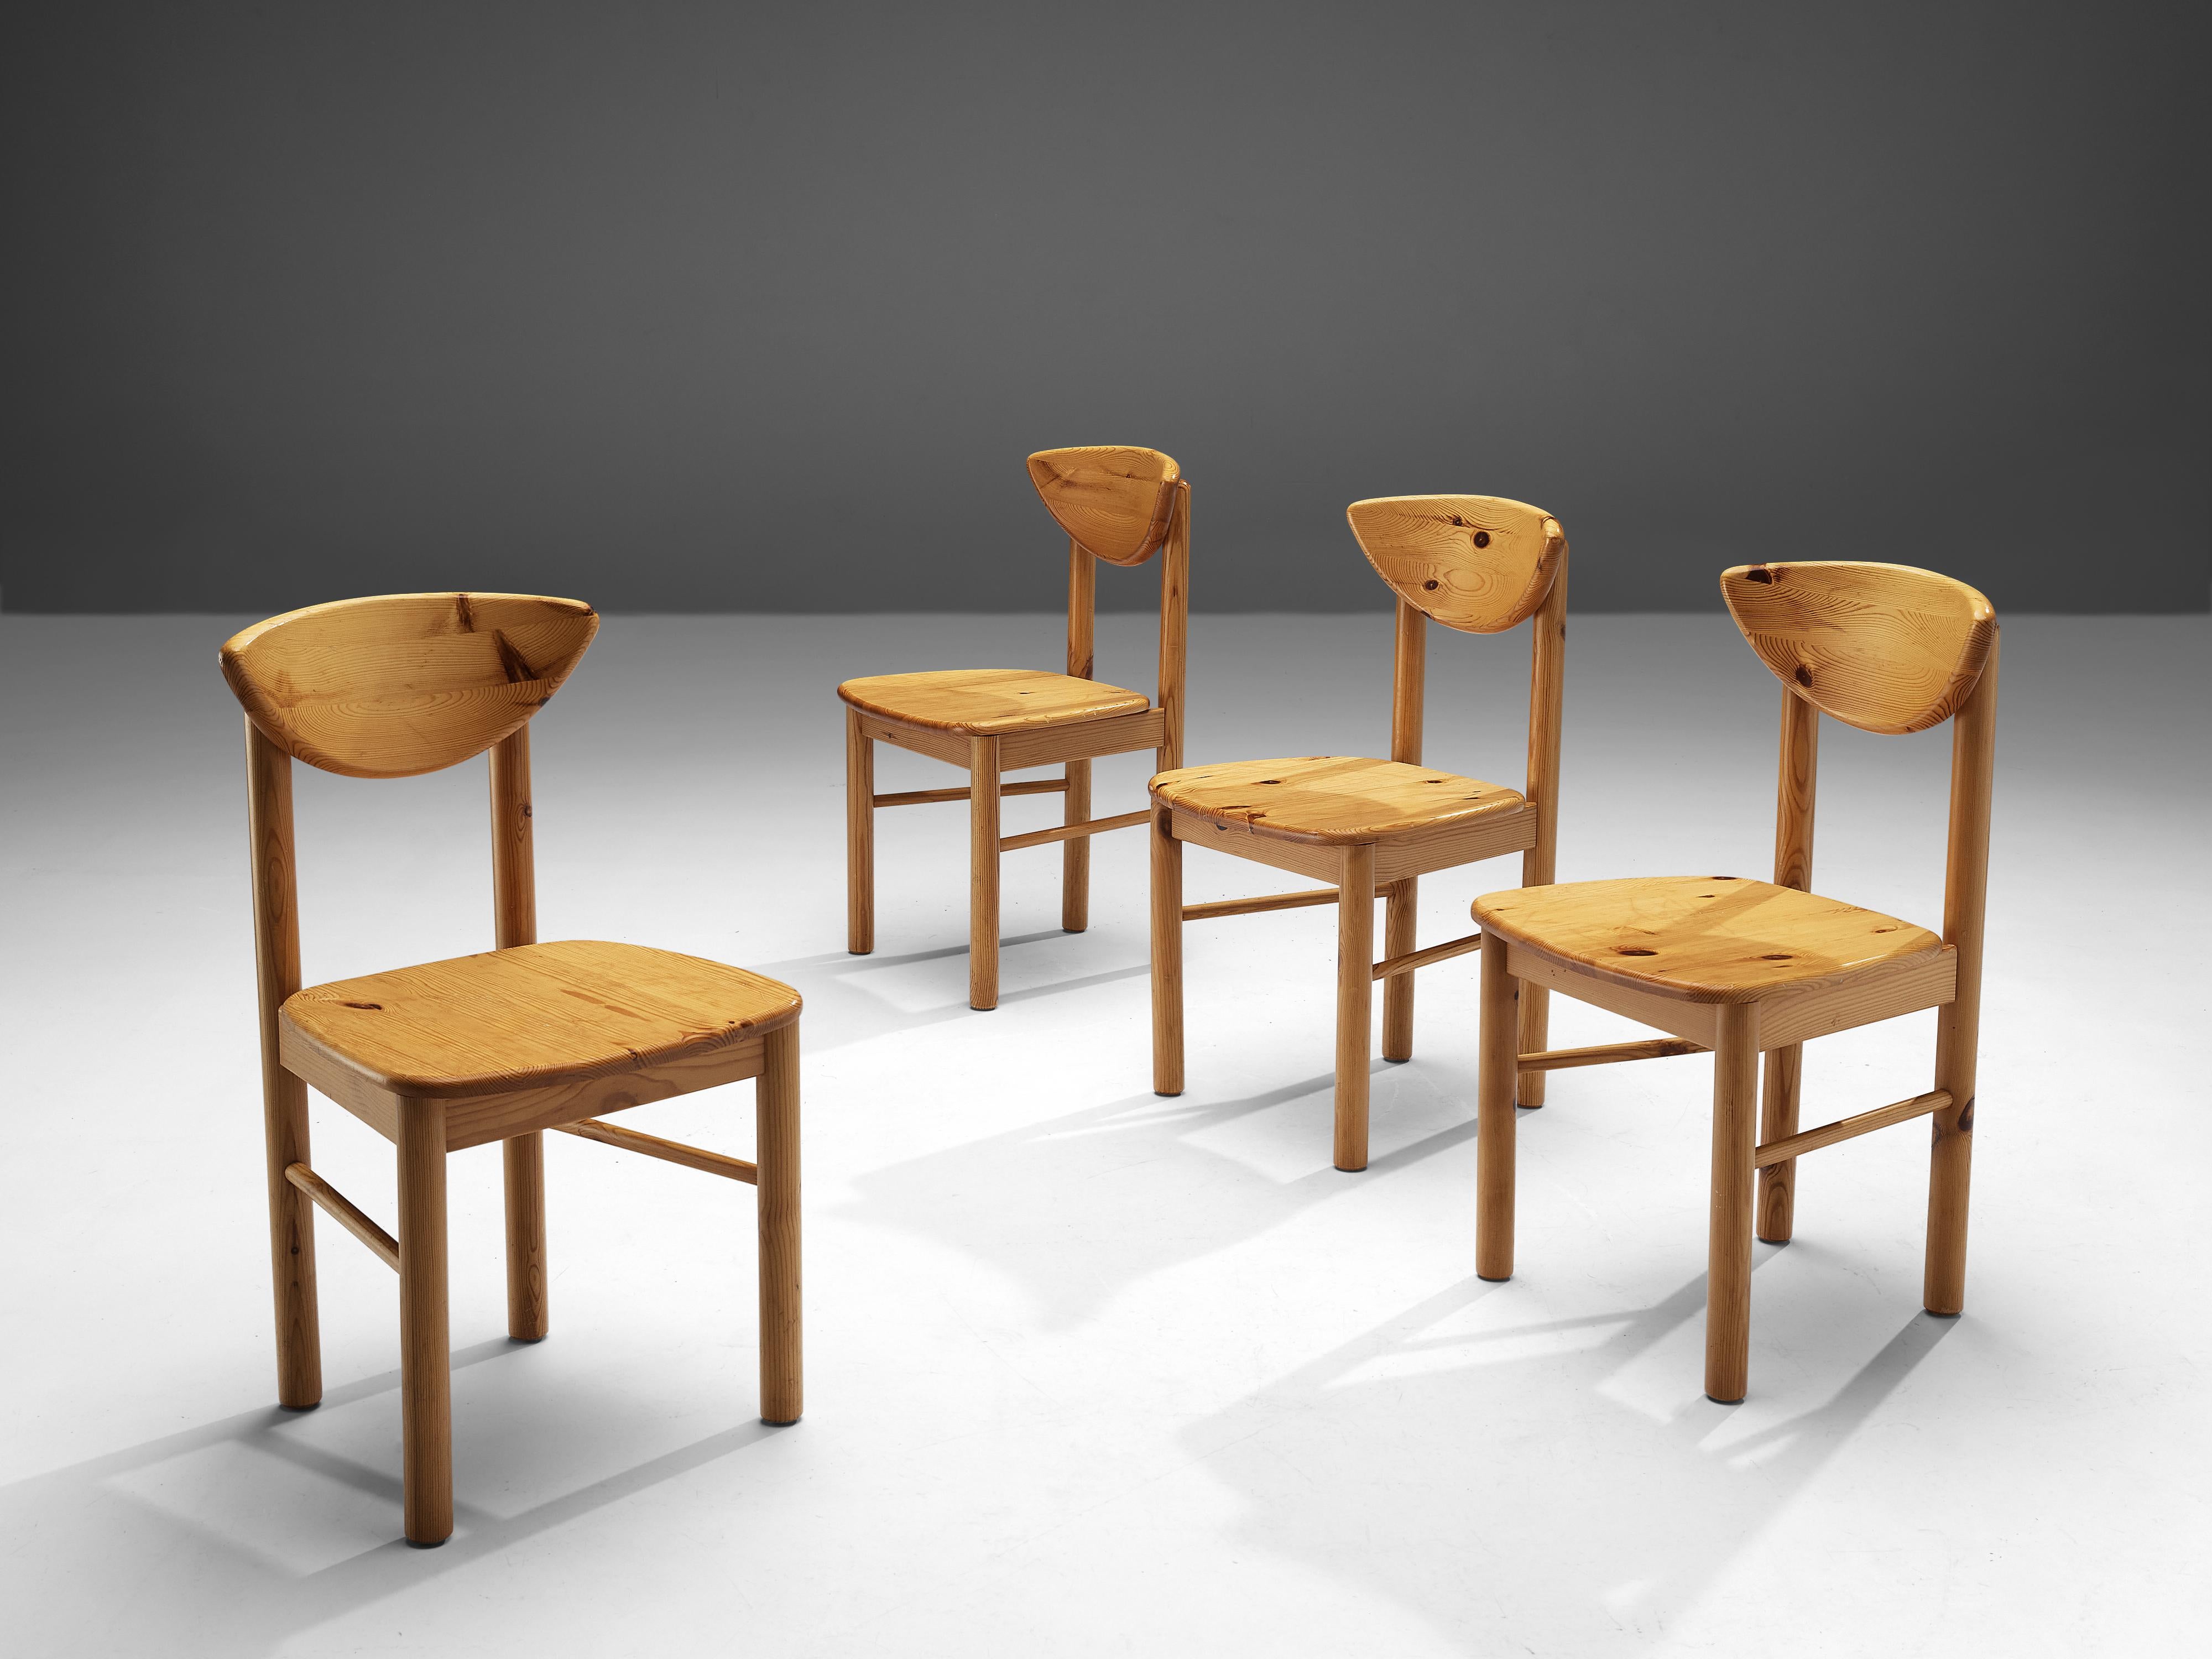 Rainer Daumiller, dining chairs, pine, Denmark, 1970s

Beautiful set of organic and natural armchairs in solid pine. A lovely design focusing on the natural expression and grain of the wood. The chairs are very comfortable and show excellent